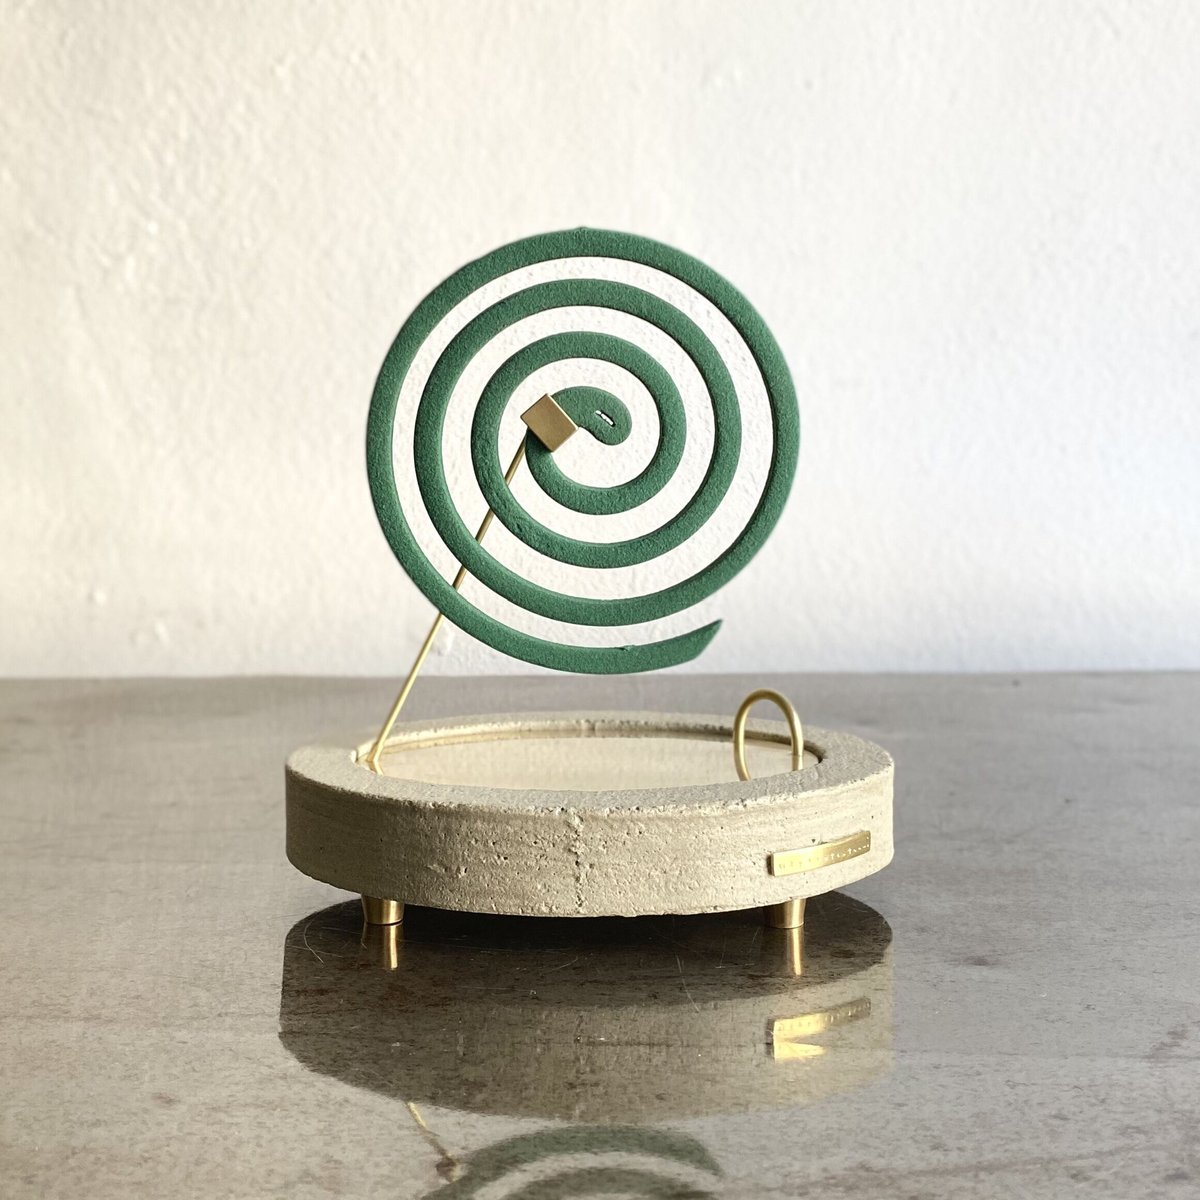 21-im incense stand &Mosquito coil stand M O